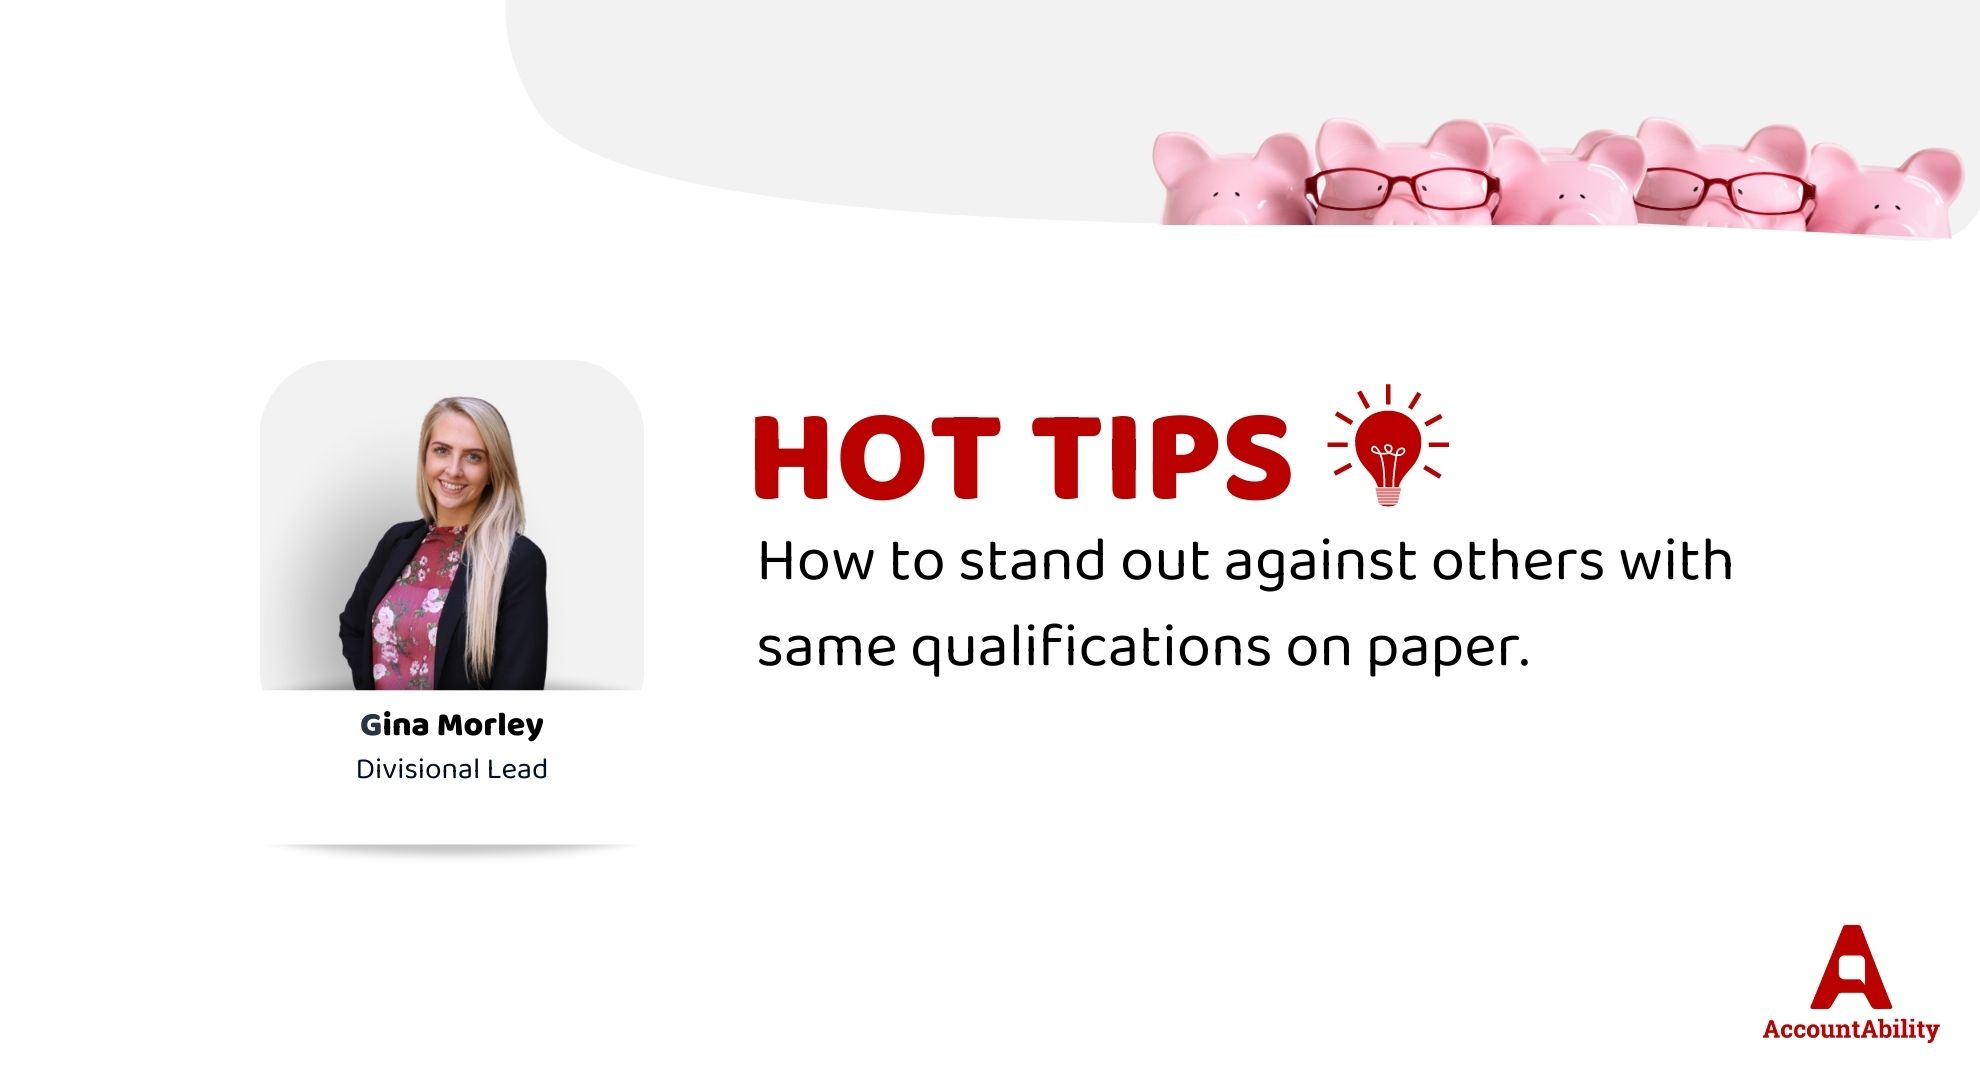 How to stand out against others with same qualifications on paper